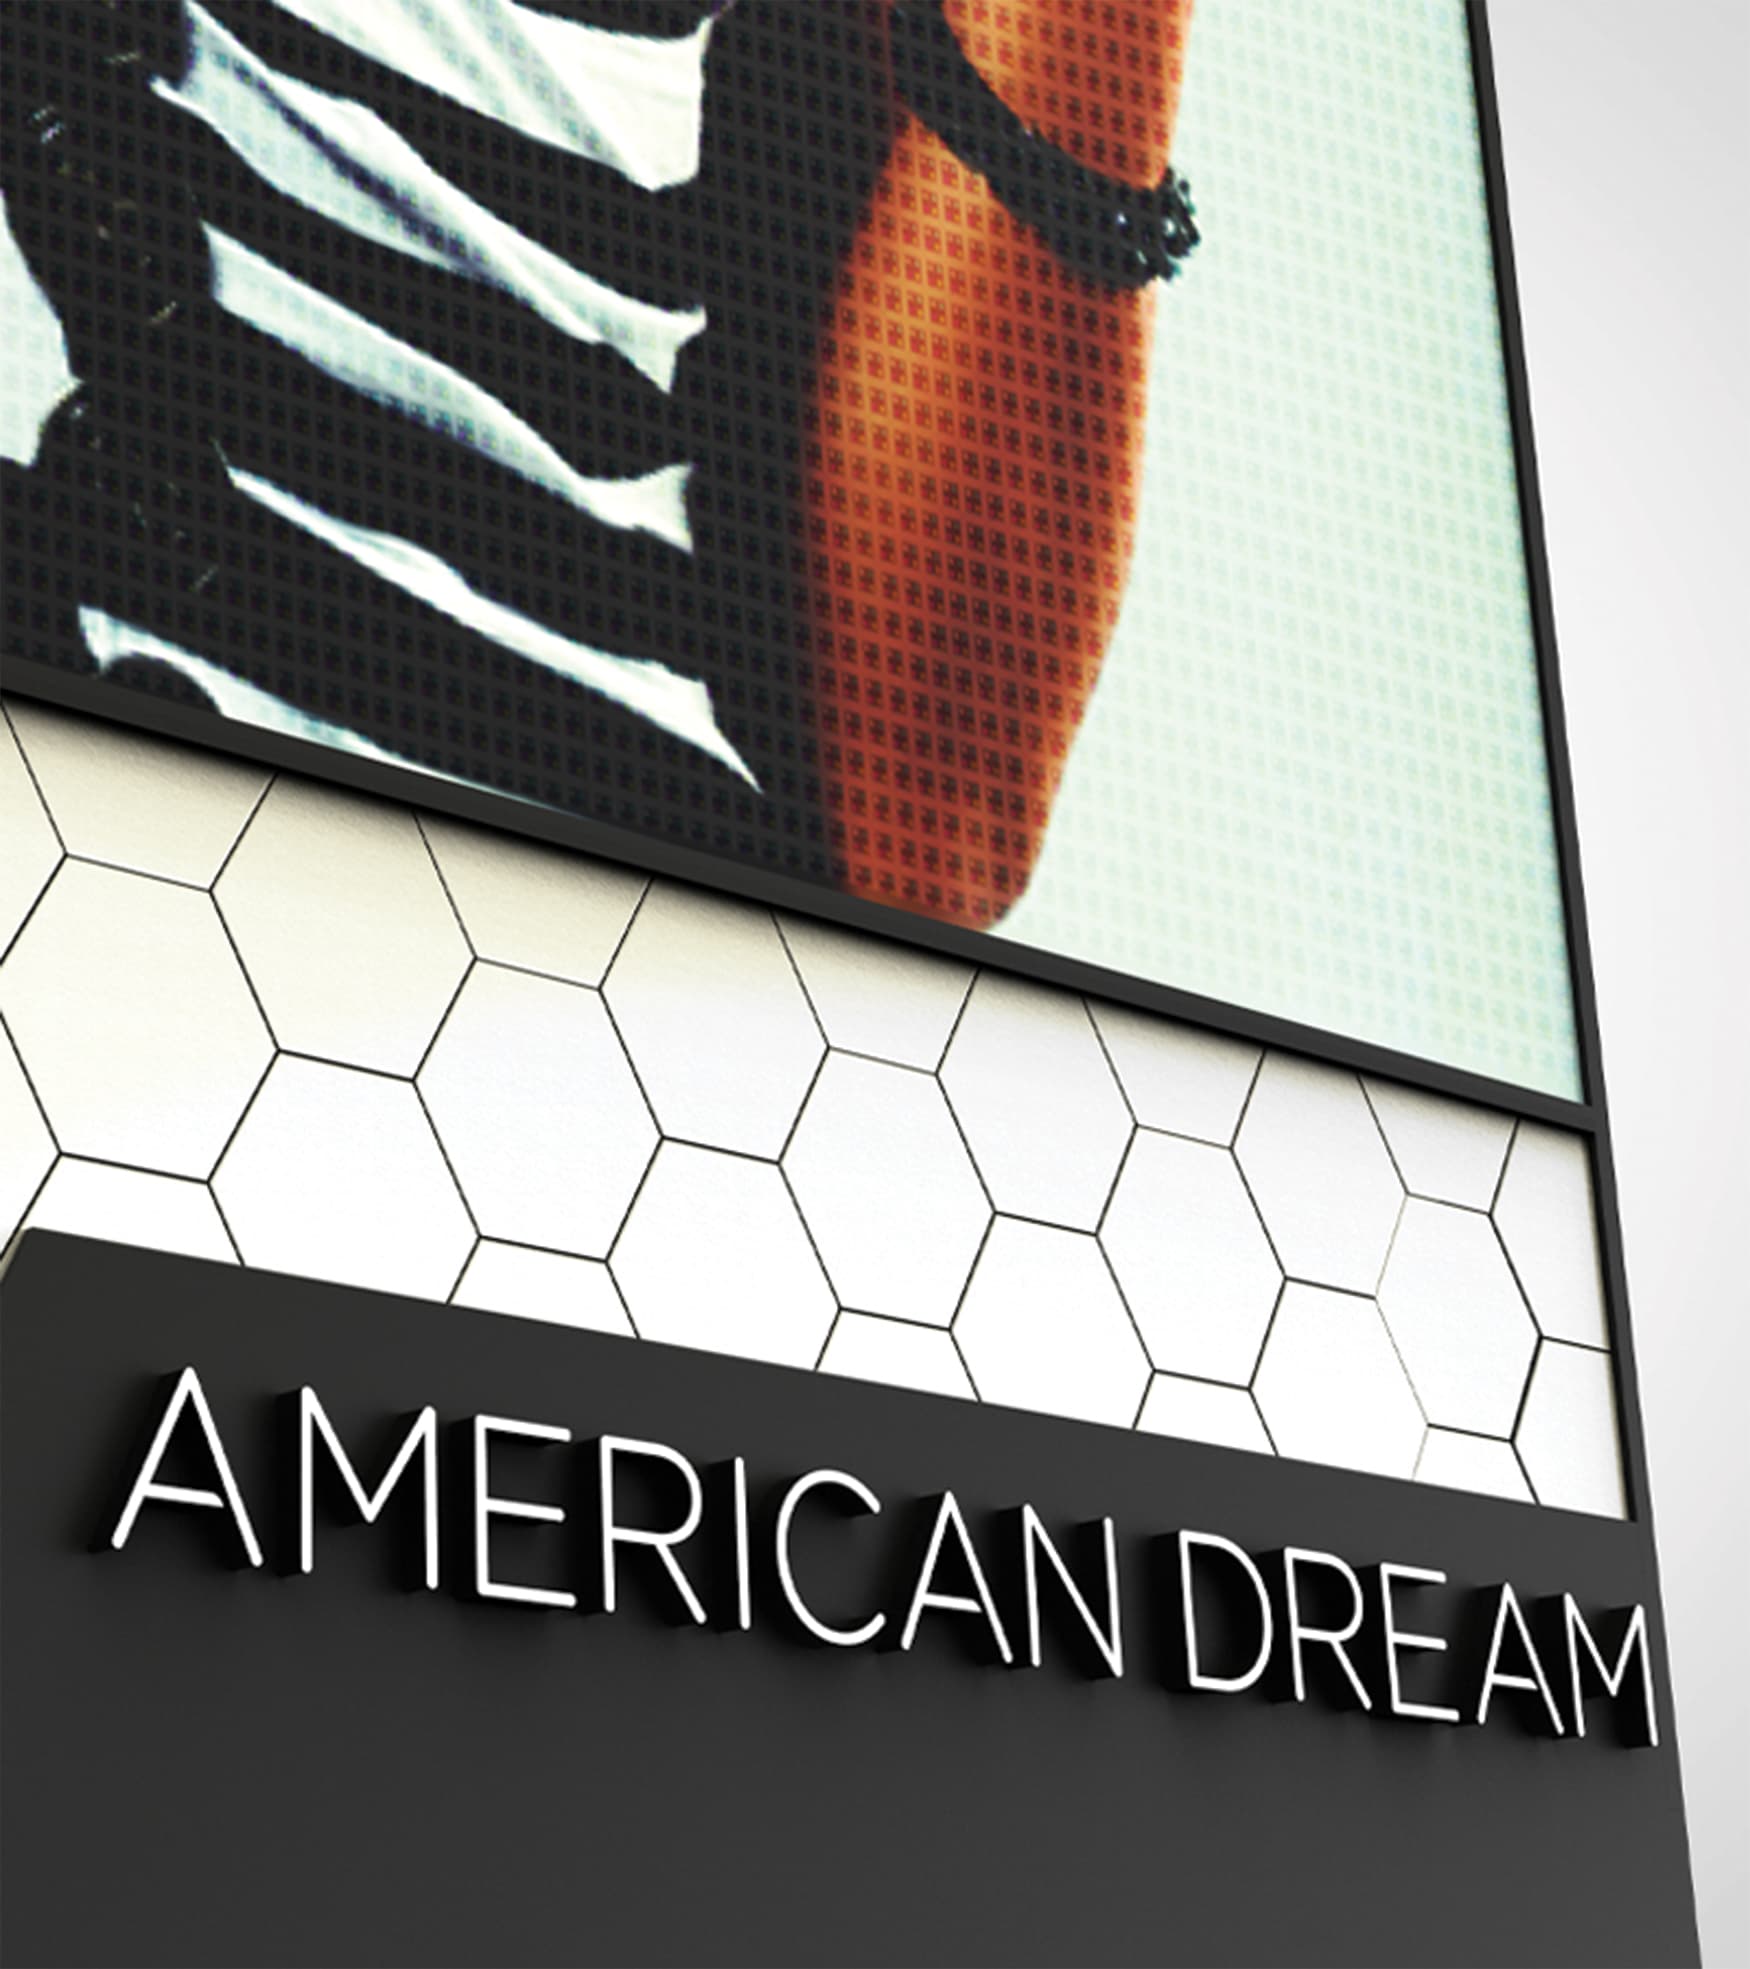 American Dream Retail Project Design in East Rutherford, New Jersey. American Dream highway pylon design detail